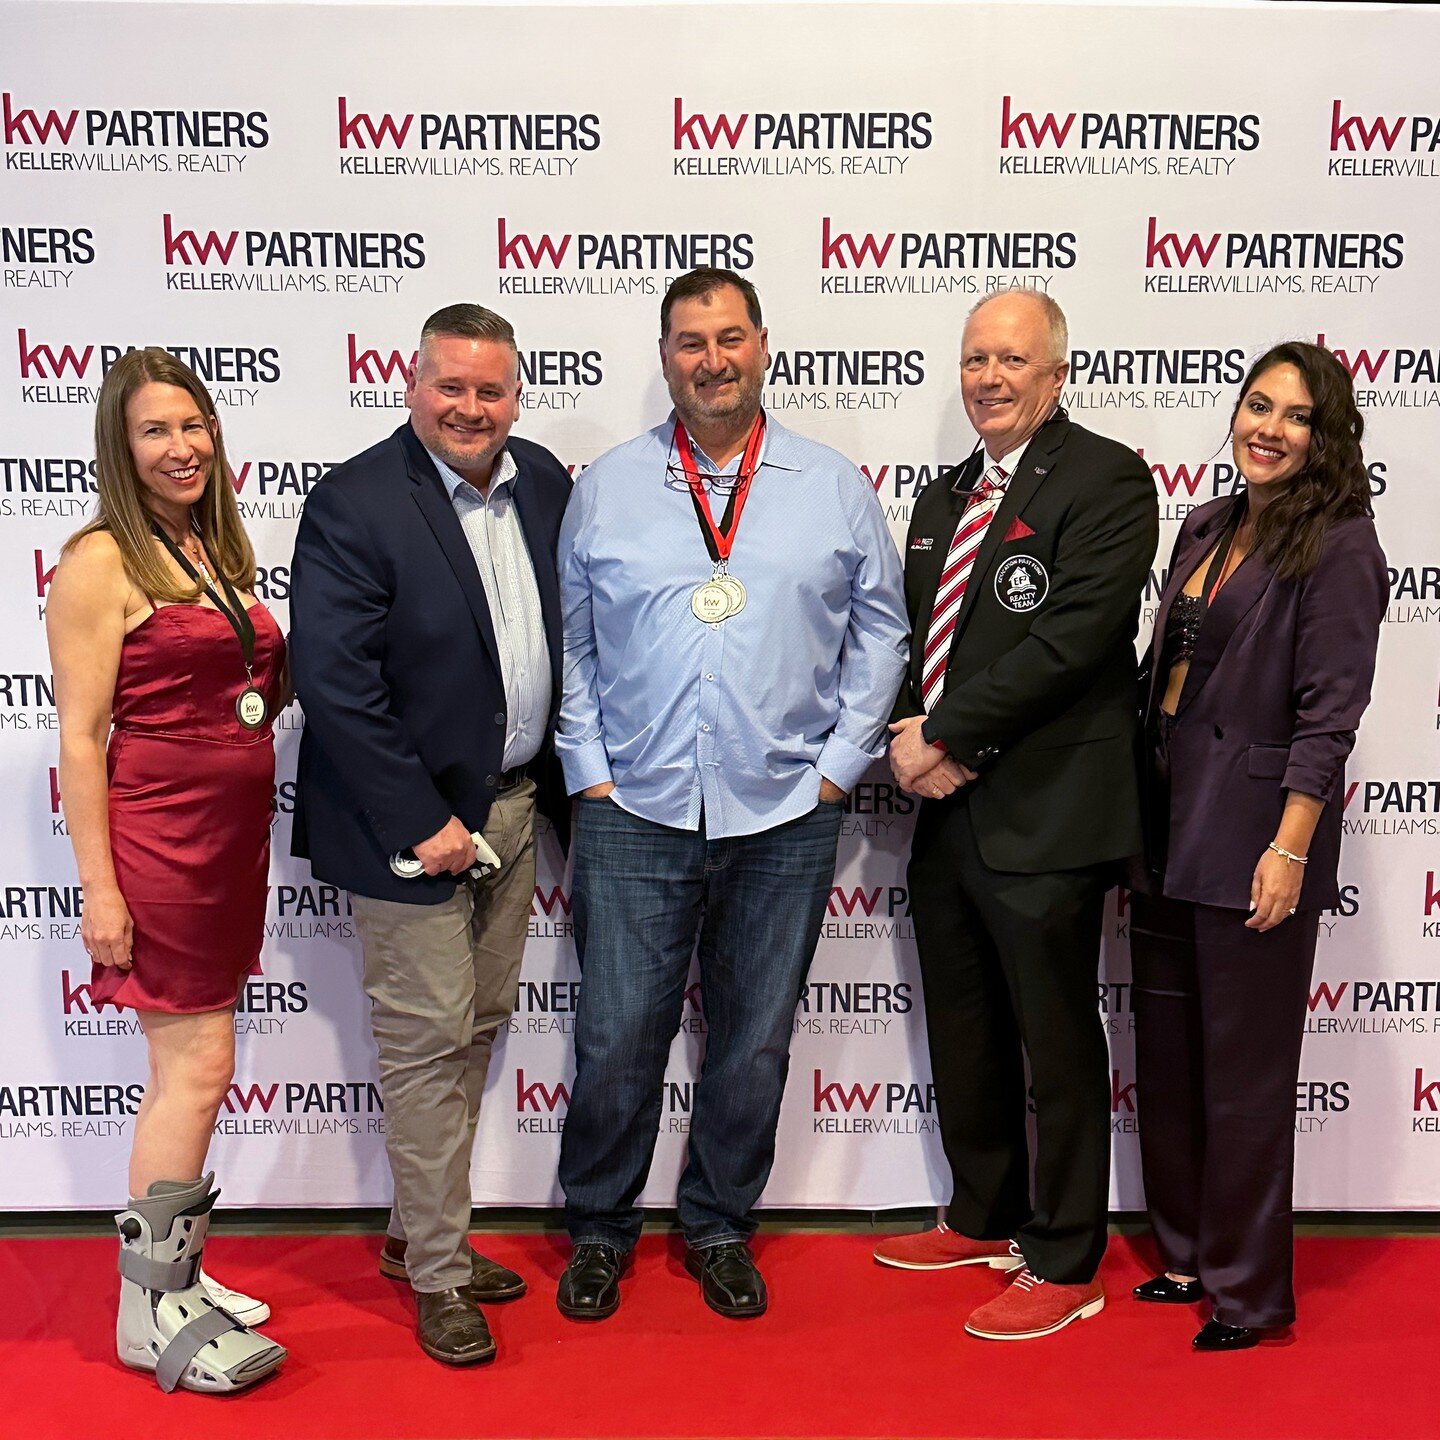 The EF2 Realty Team really racked up the Keller Williams Realty Partners awards! Thanks to everyone for their hard work and dedication. Onward and upward!

With over $30 million in real estate sales in 2023, we are ready for 2024! Let us help you rea